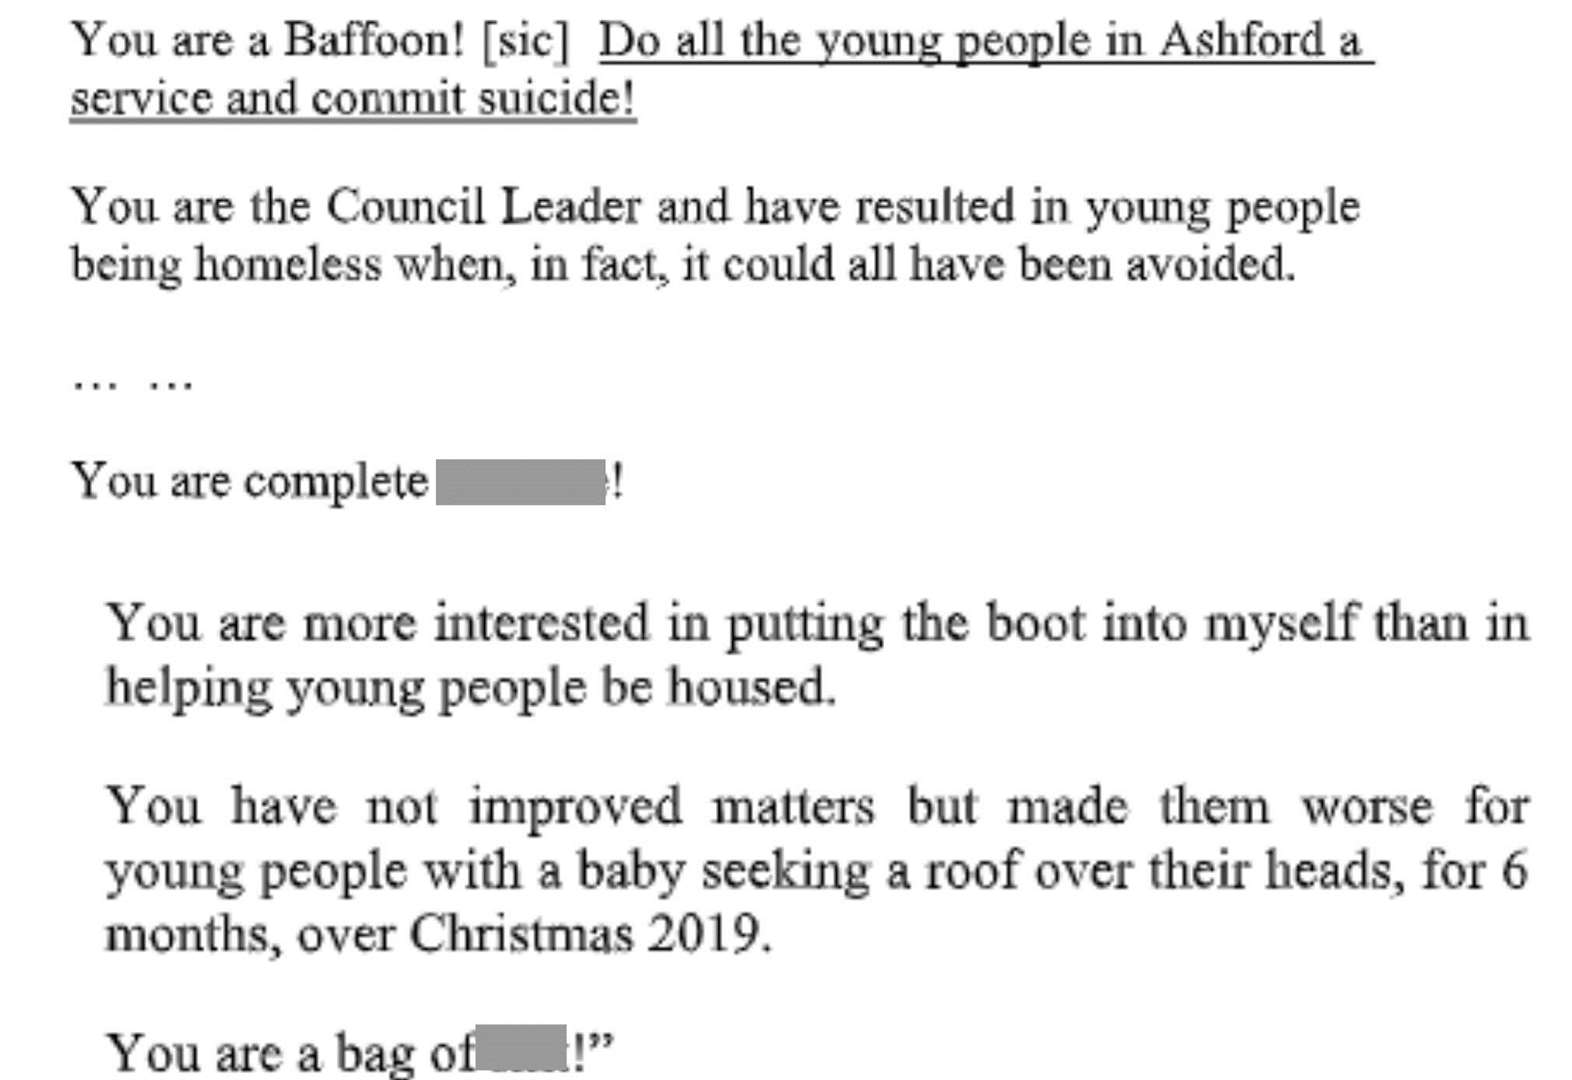 Excerpts from a letter Mr Wilson wrote to Cllr Clarkson's home address